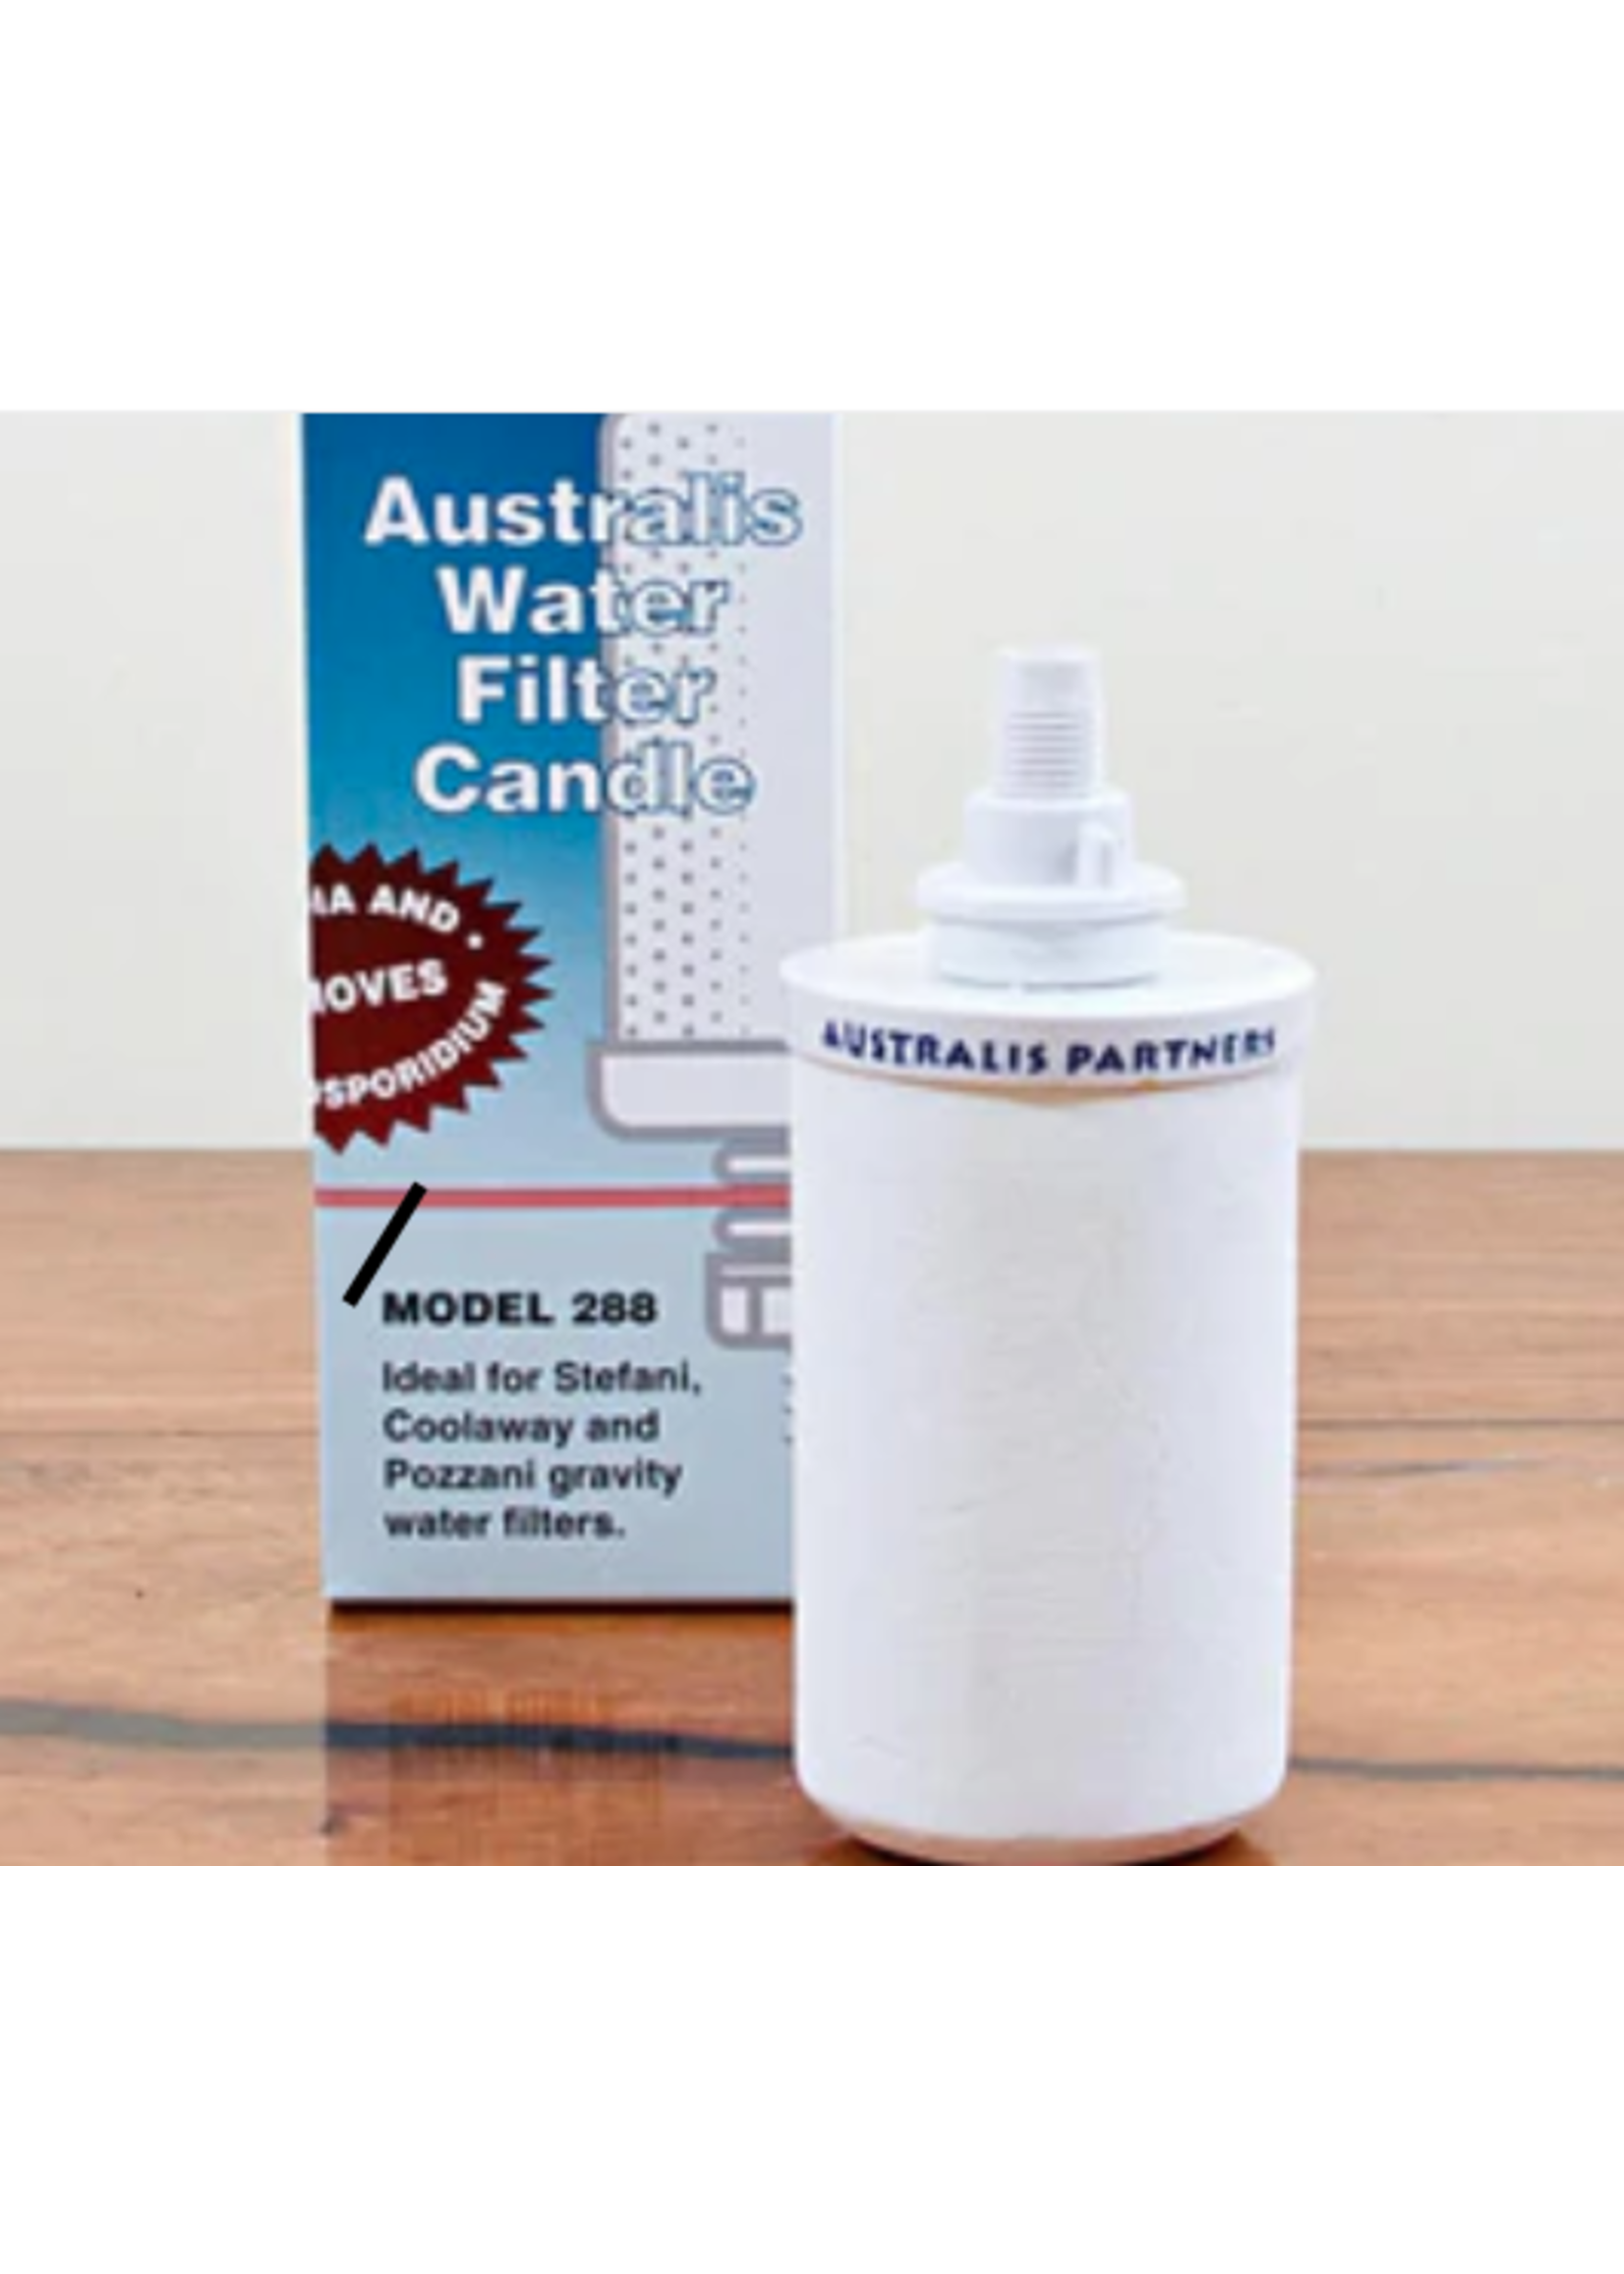 Australis Australis  Water Filter Candle model 288     1 candle